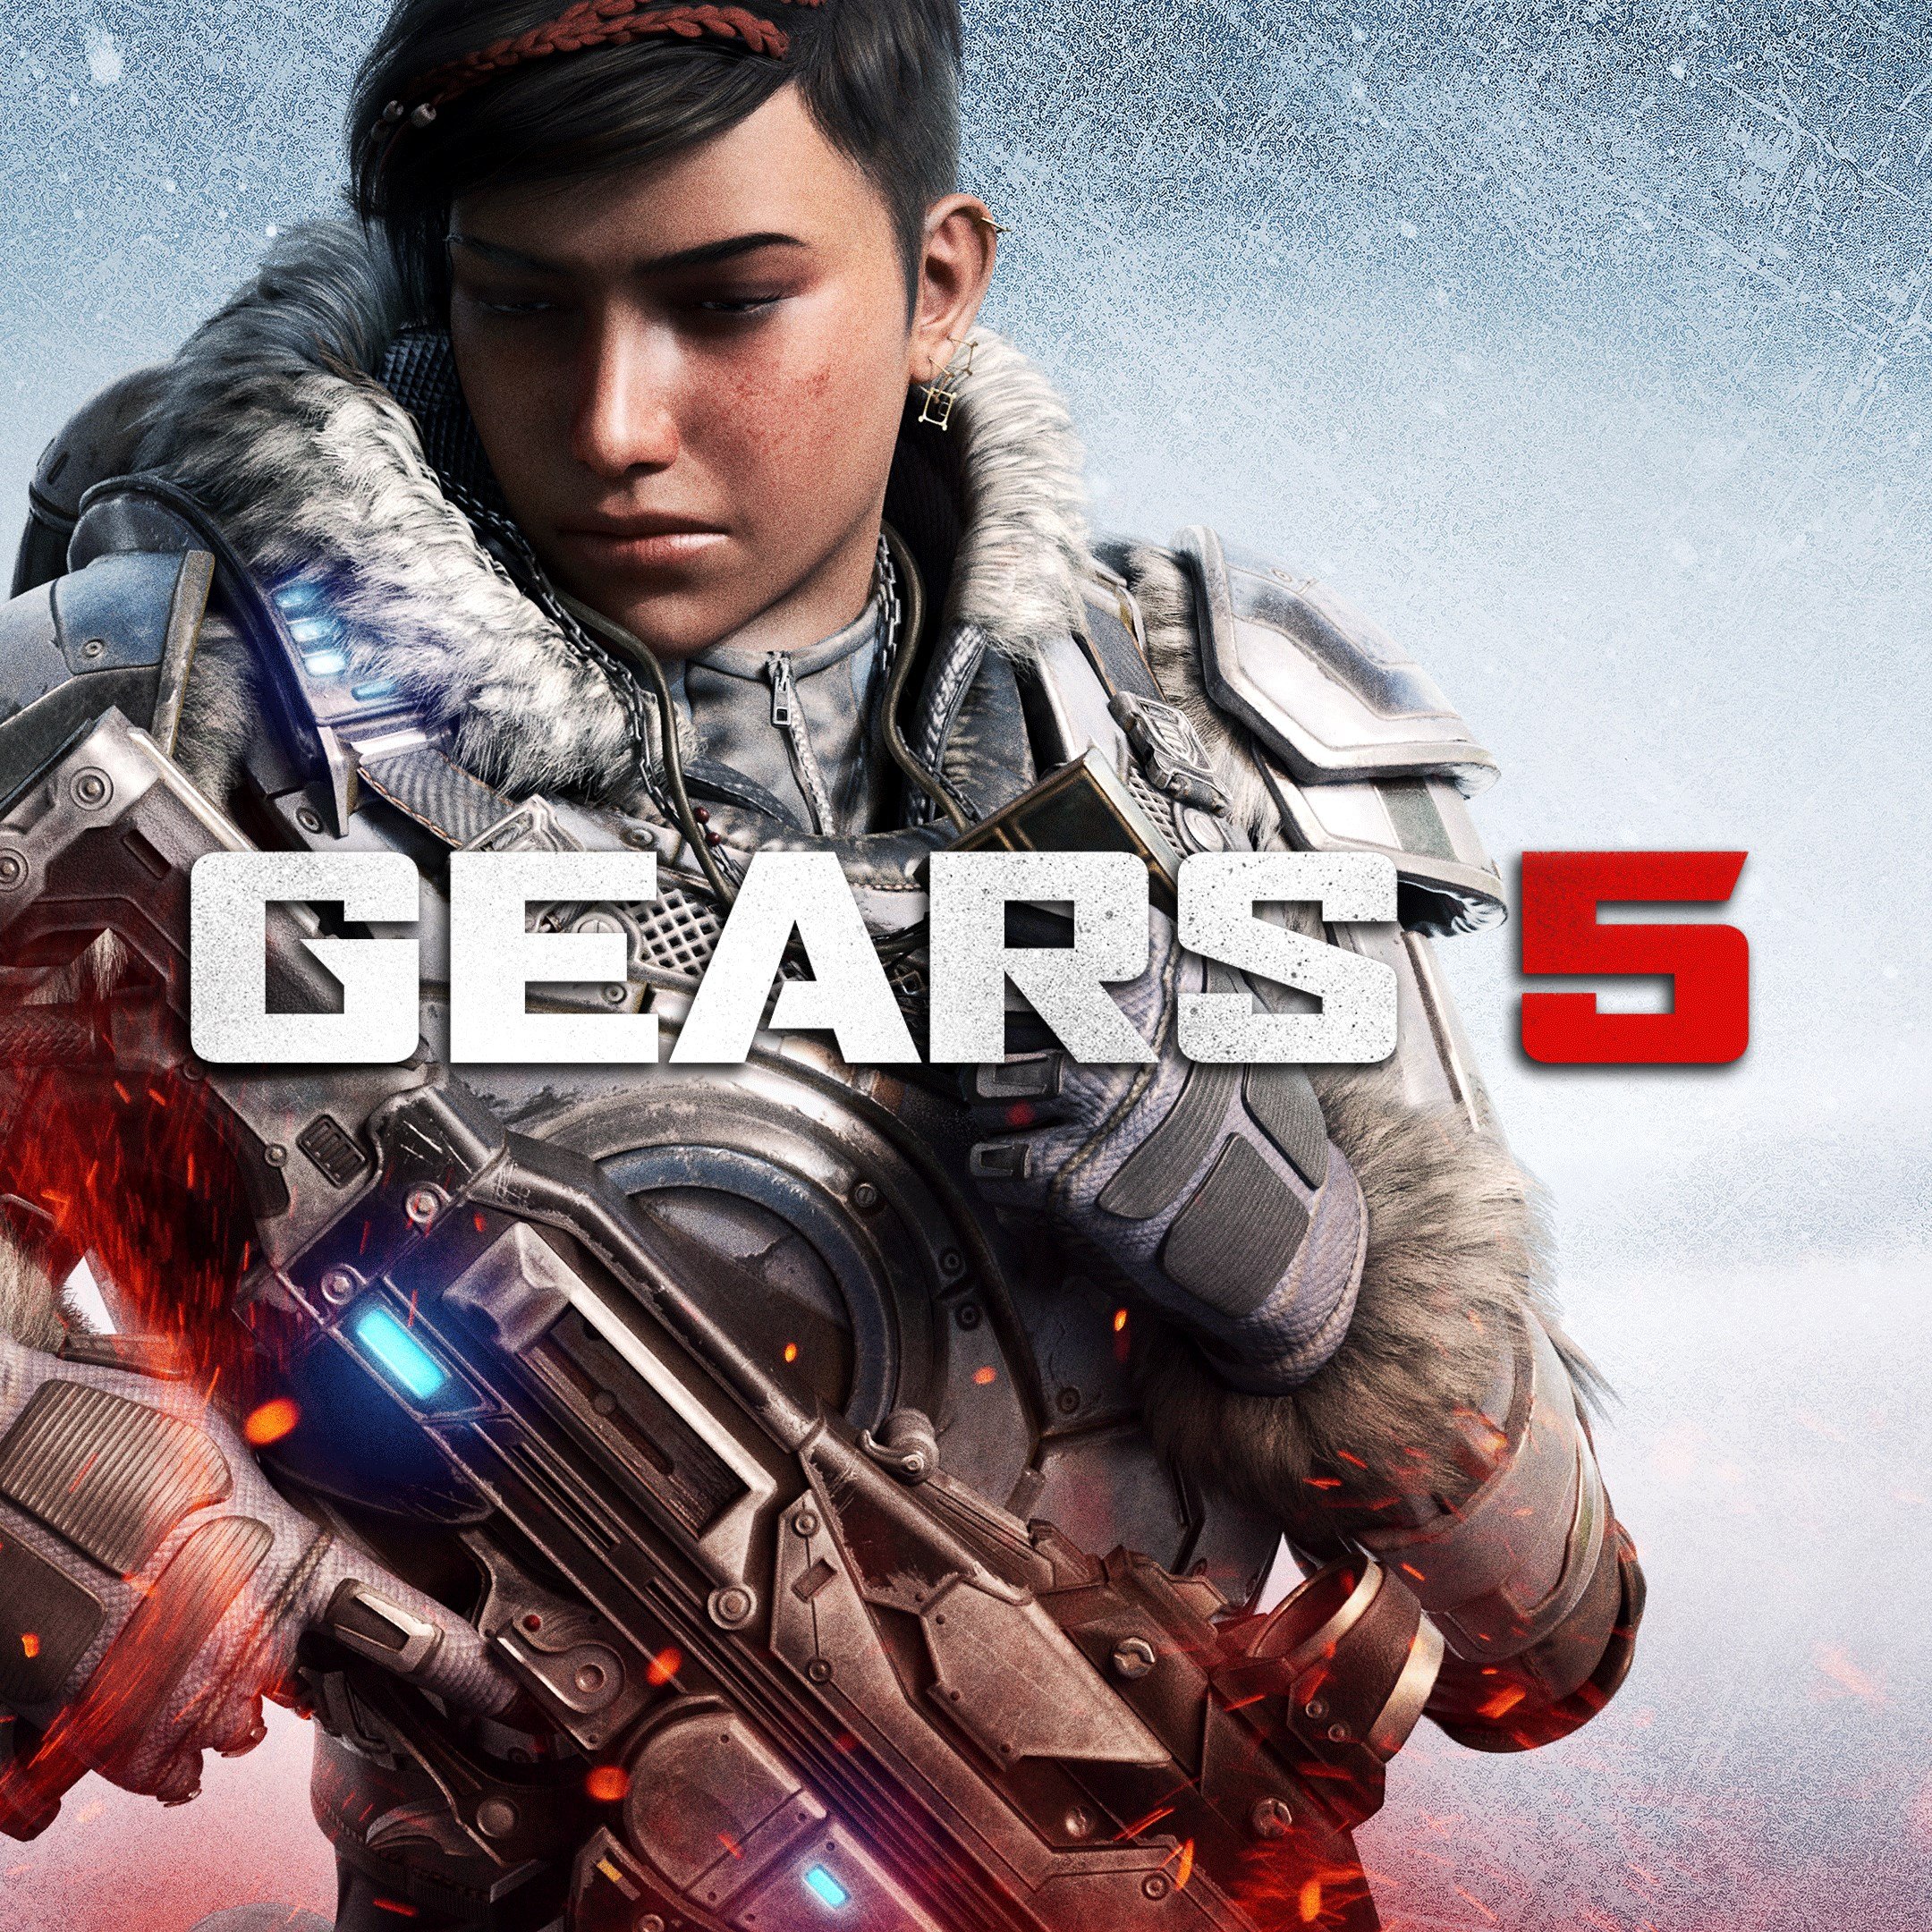 Boxart for Gears 5